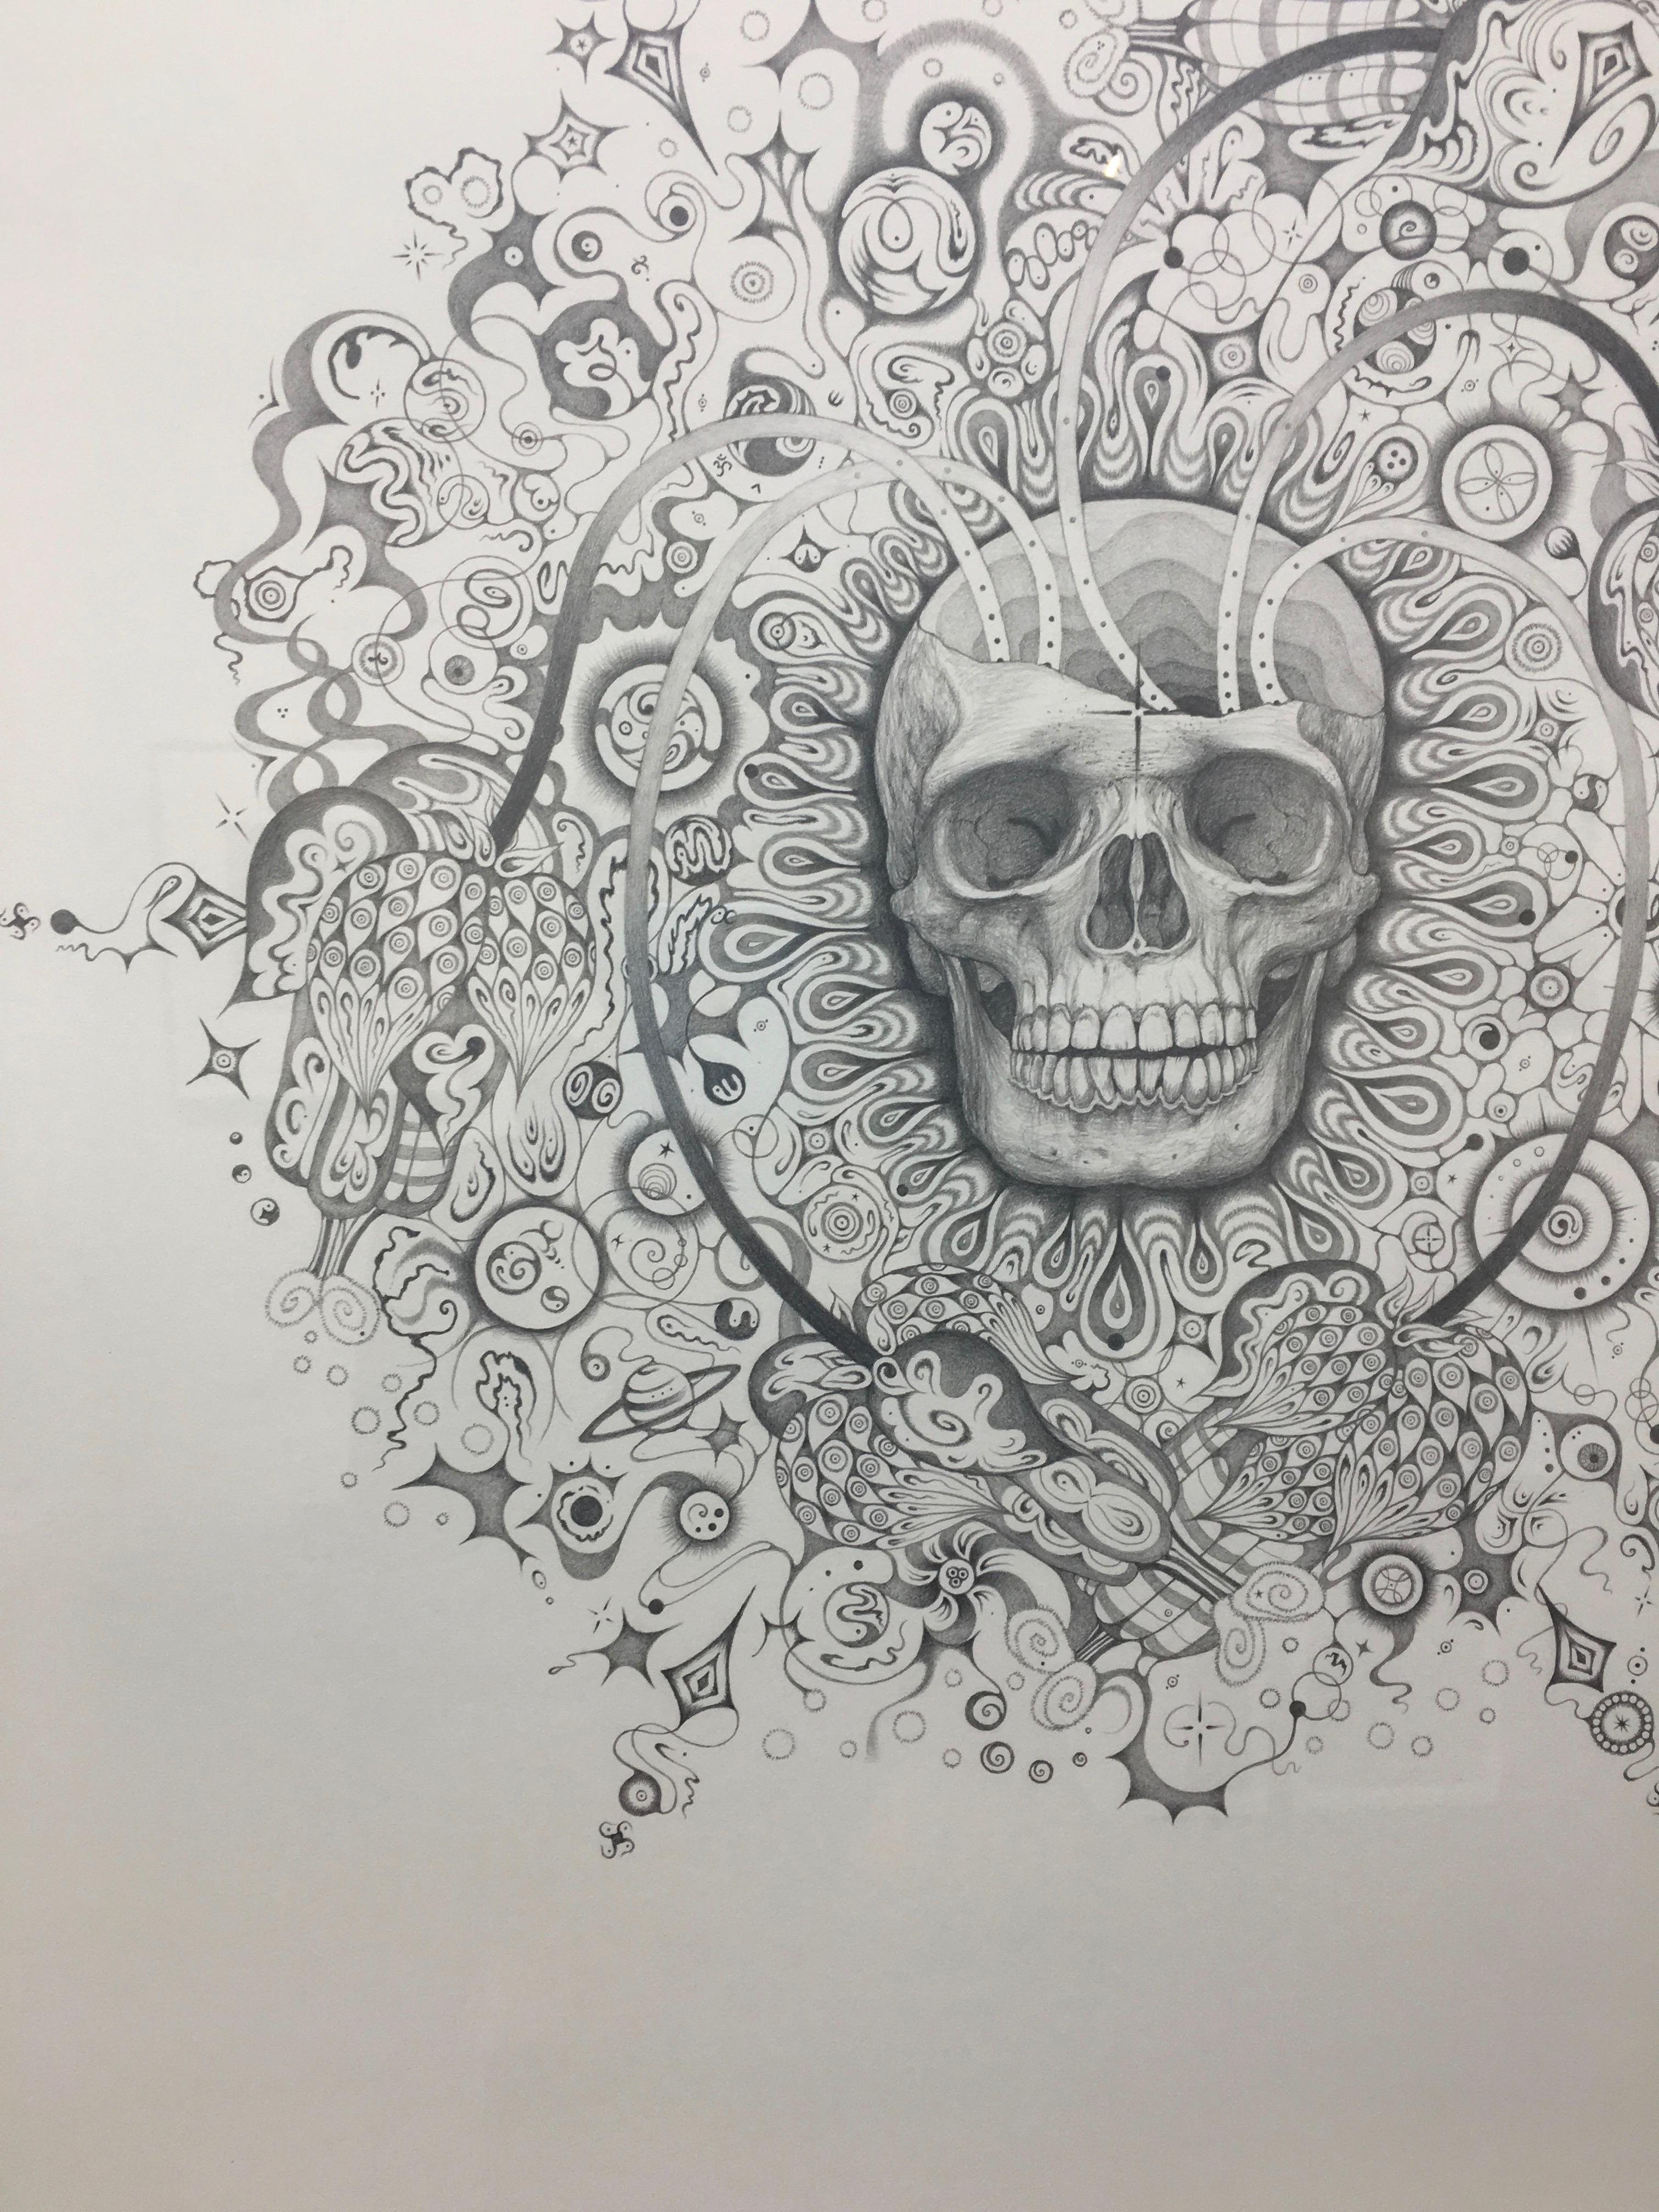 A meticulously rendered skull surrounded by intricate patterns and tiny planets is at the center of this mandala. This drawing is entirely hand-drawn using only pencil and paper.

Framed in an off-white wooden frame, 22.25 x 22.25 inches (unframed)